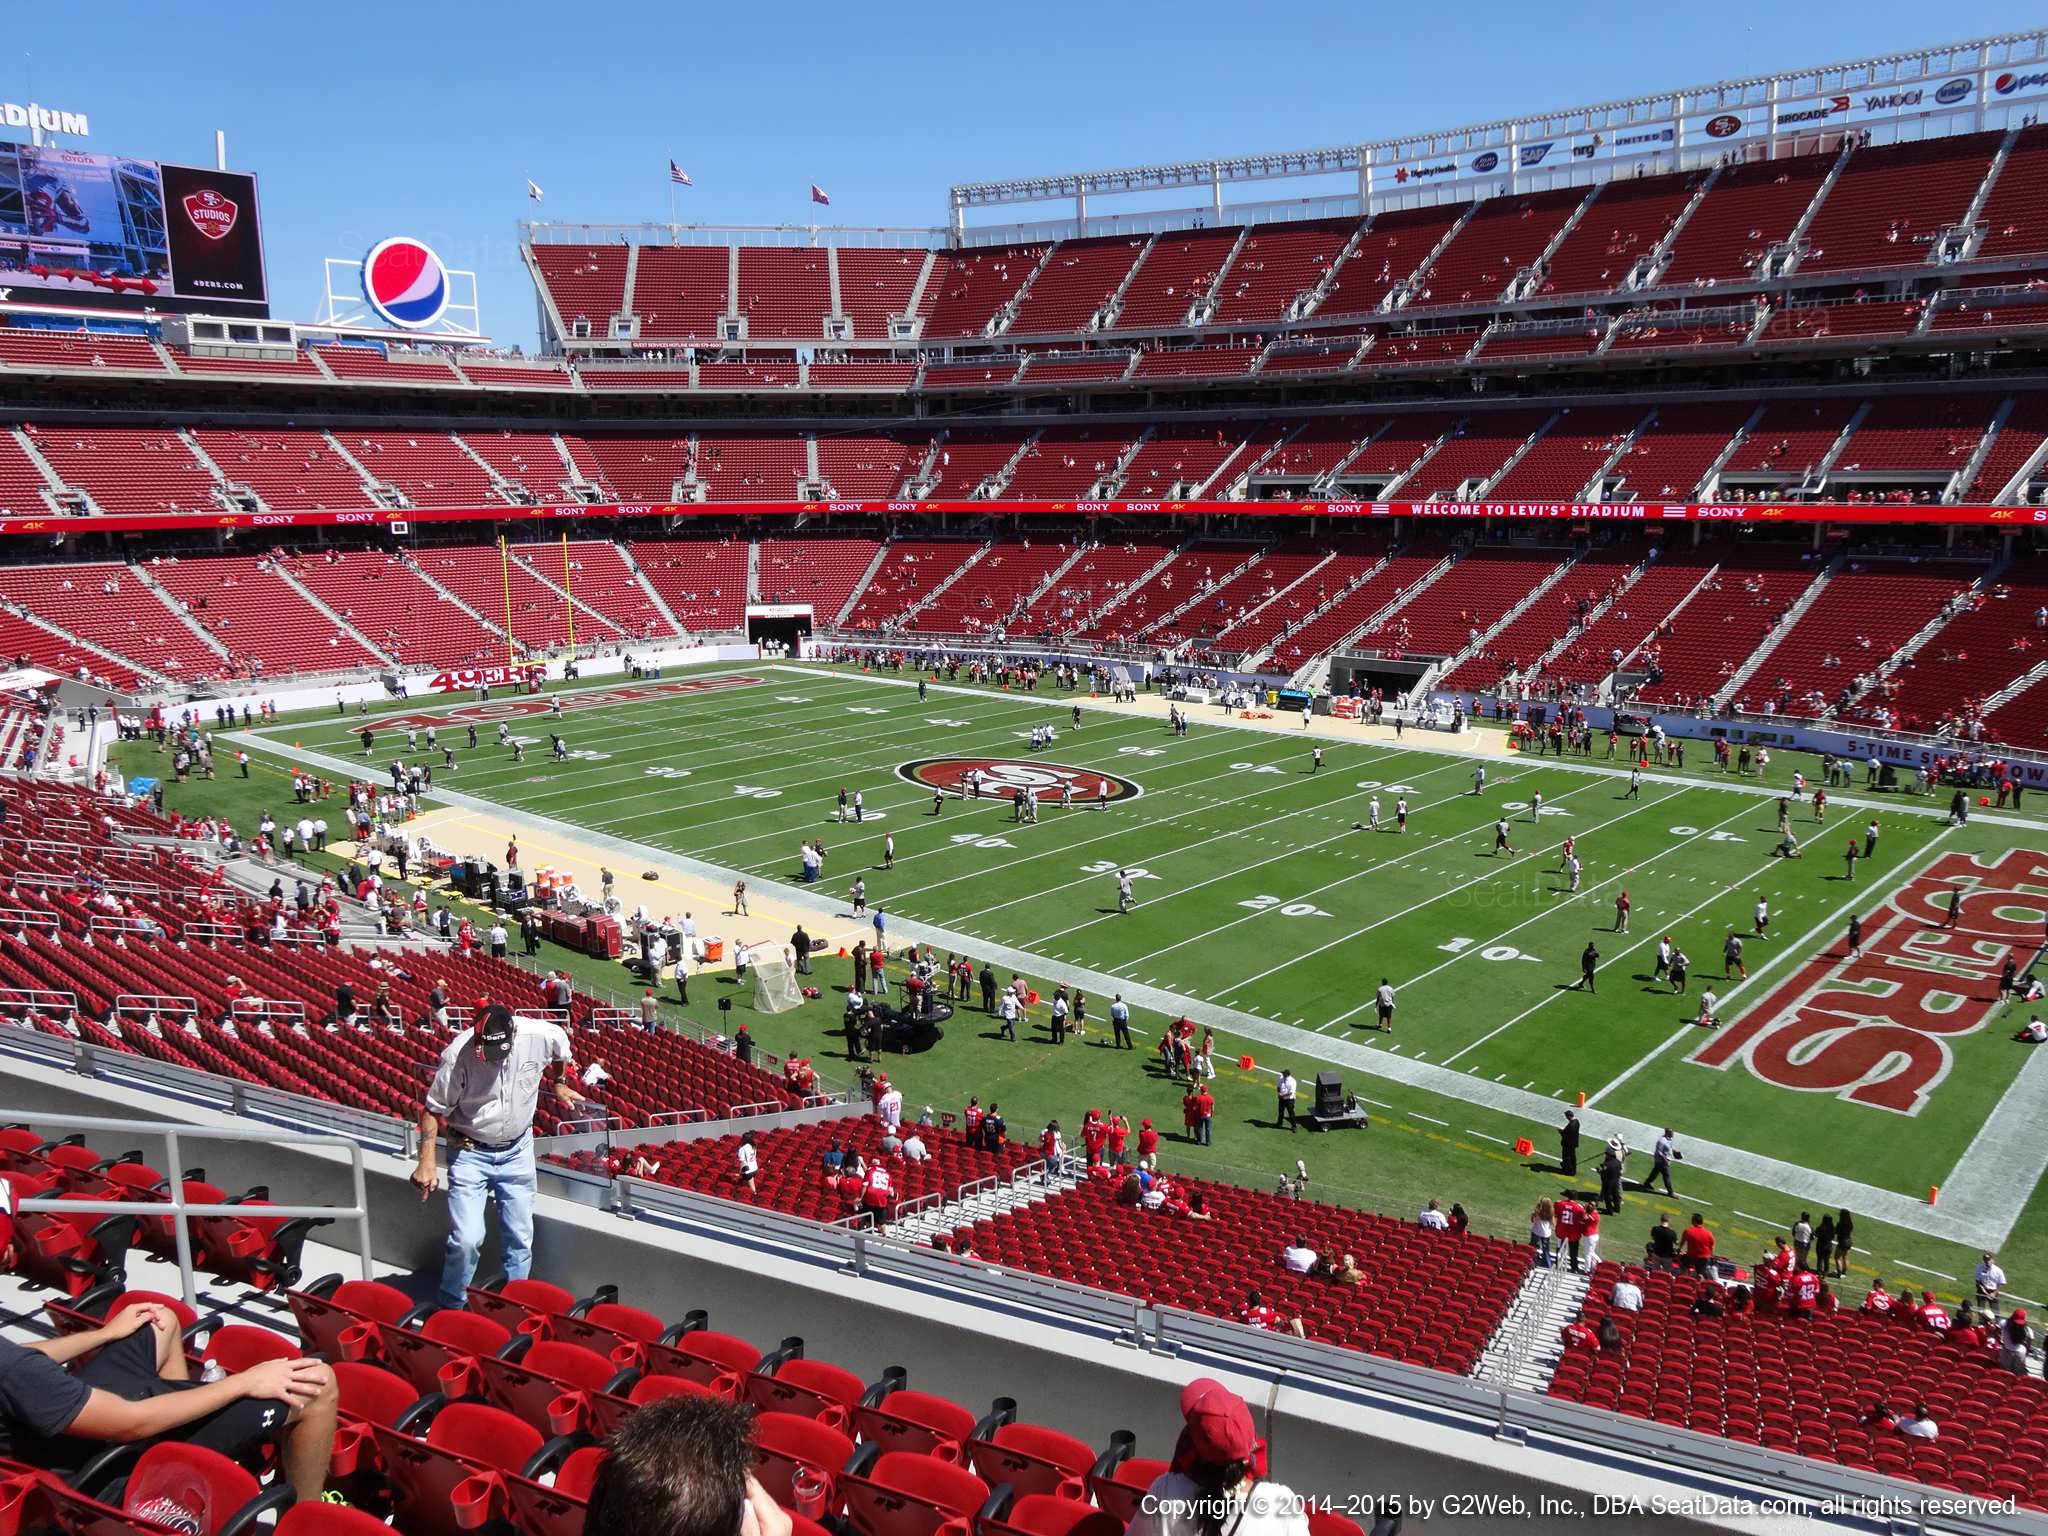 Seat view from section 233 at Levi’s Stadium, home of the San Francisco 49ers